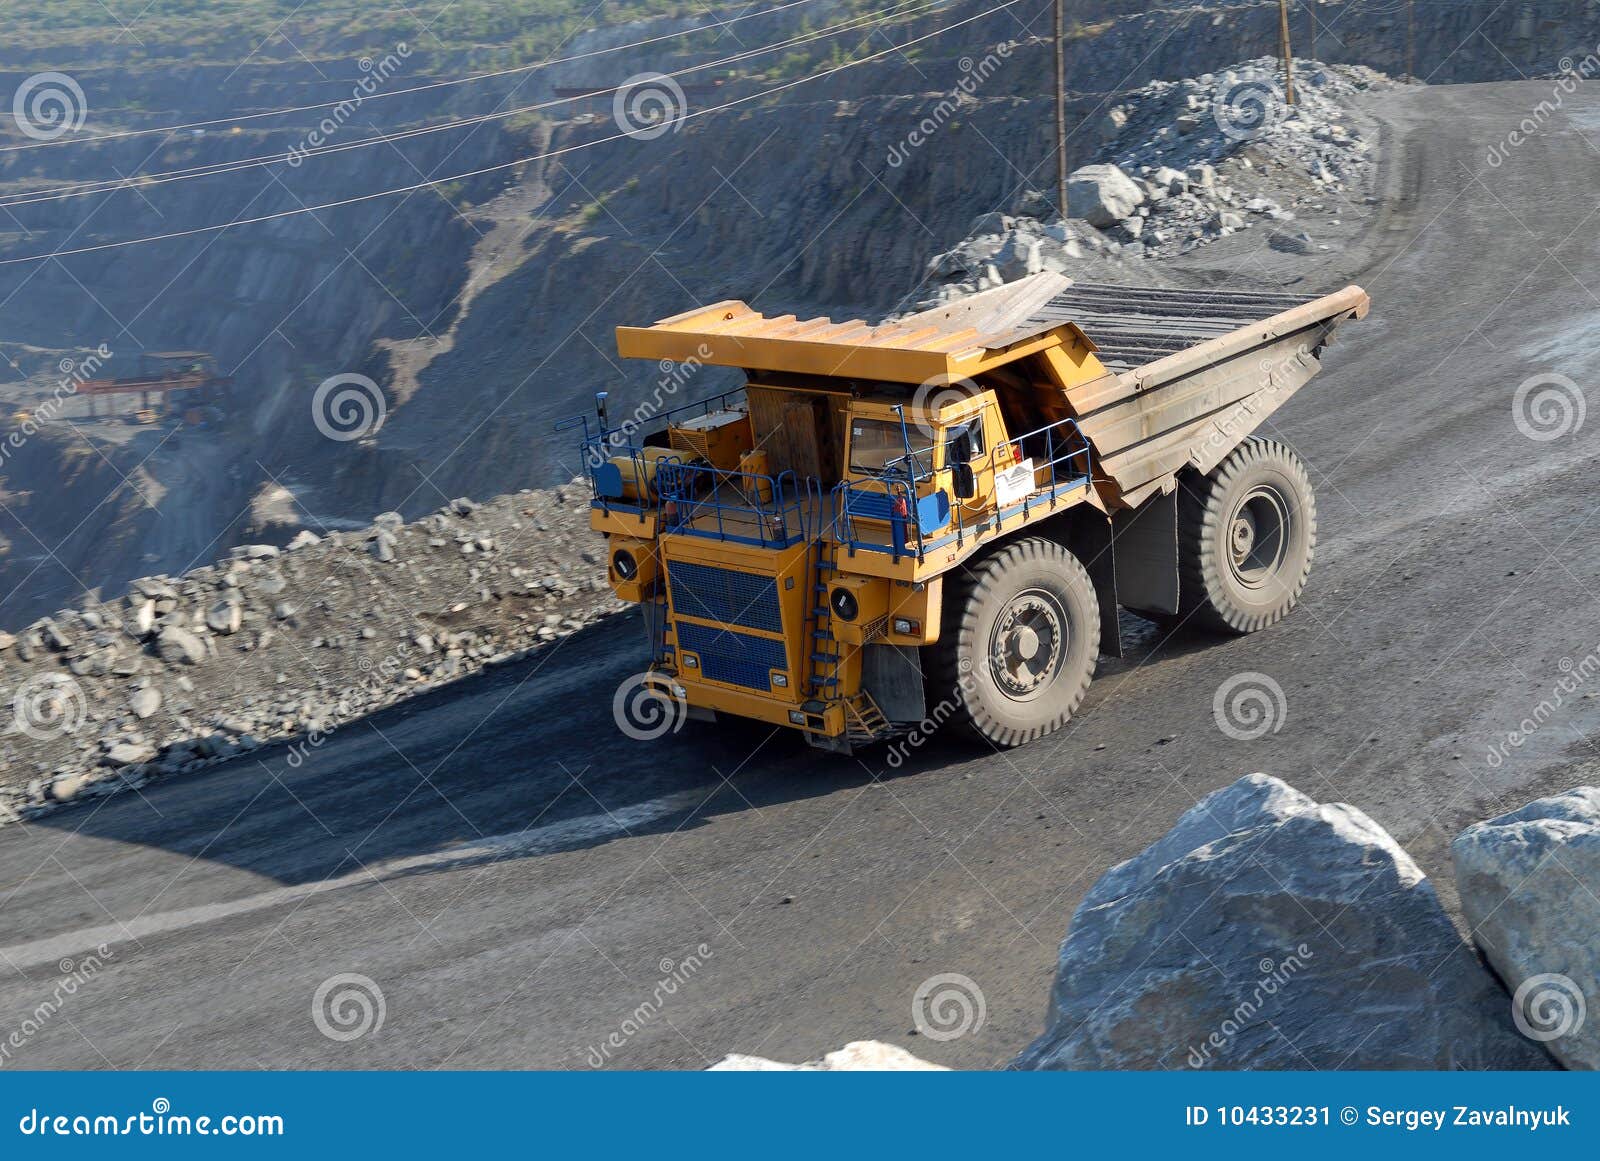 The big truck transport iron ore in career.